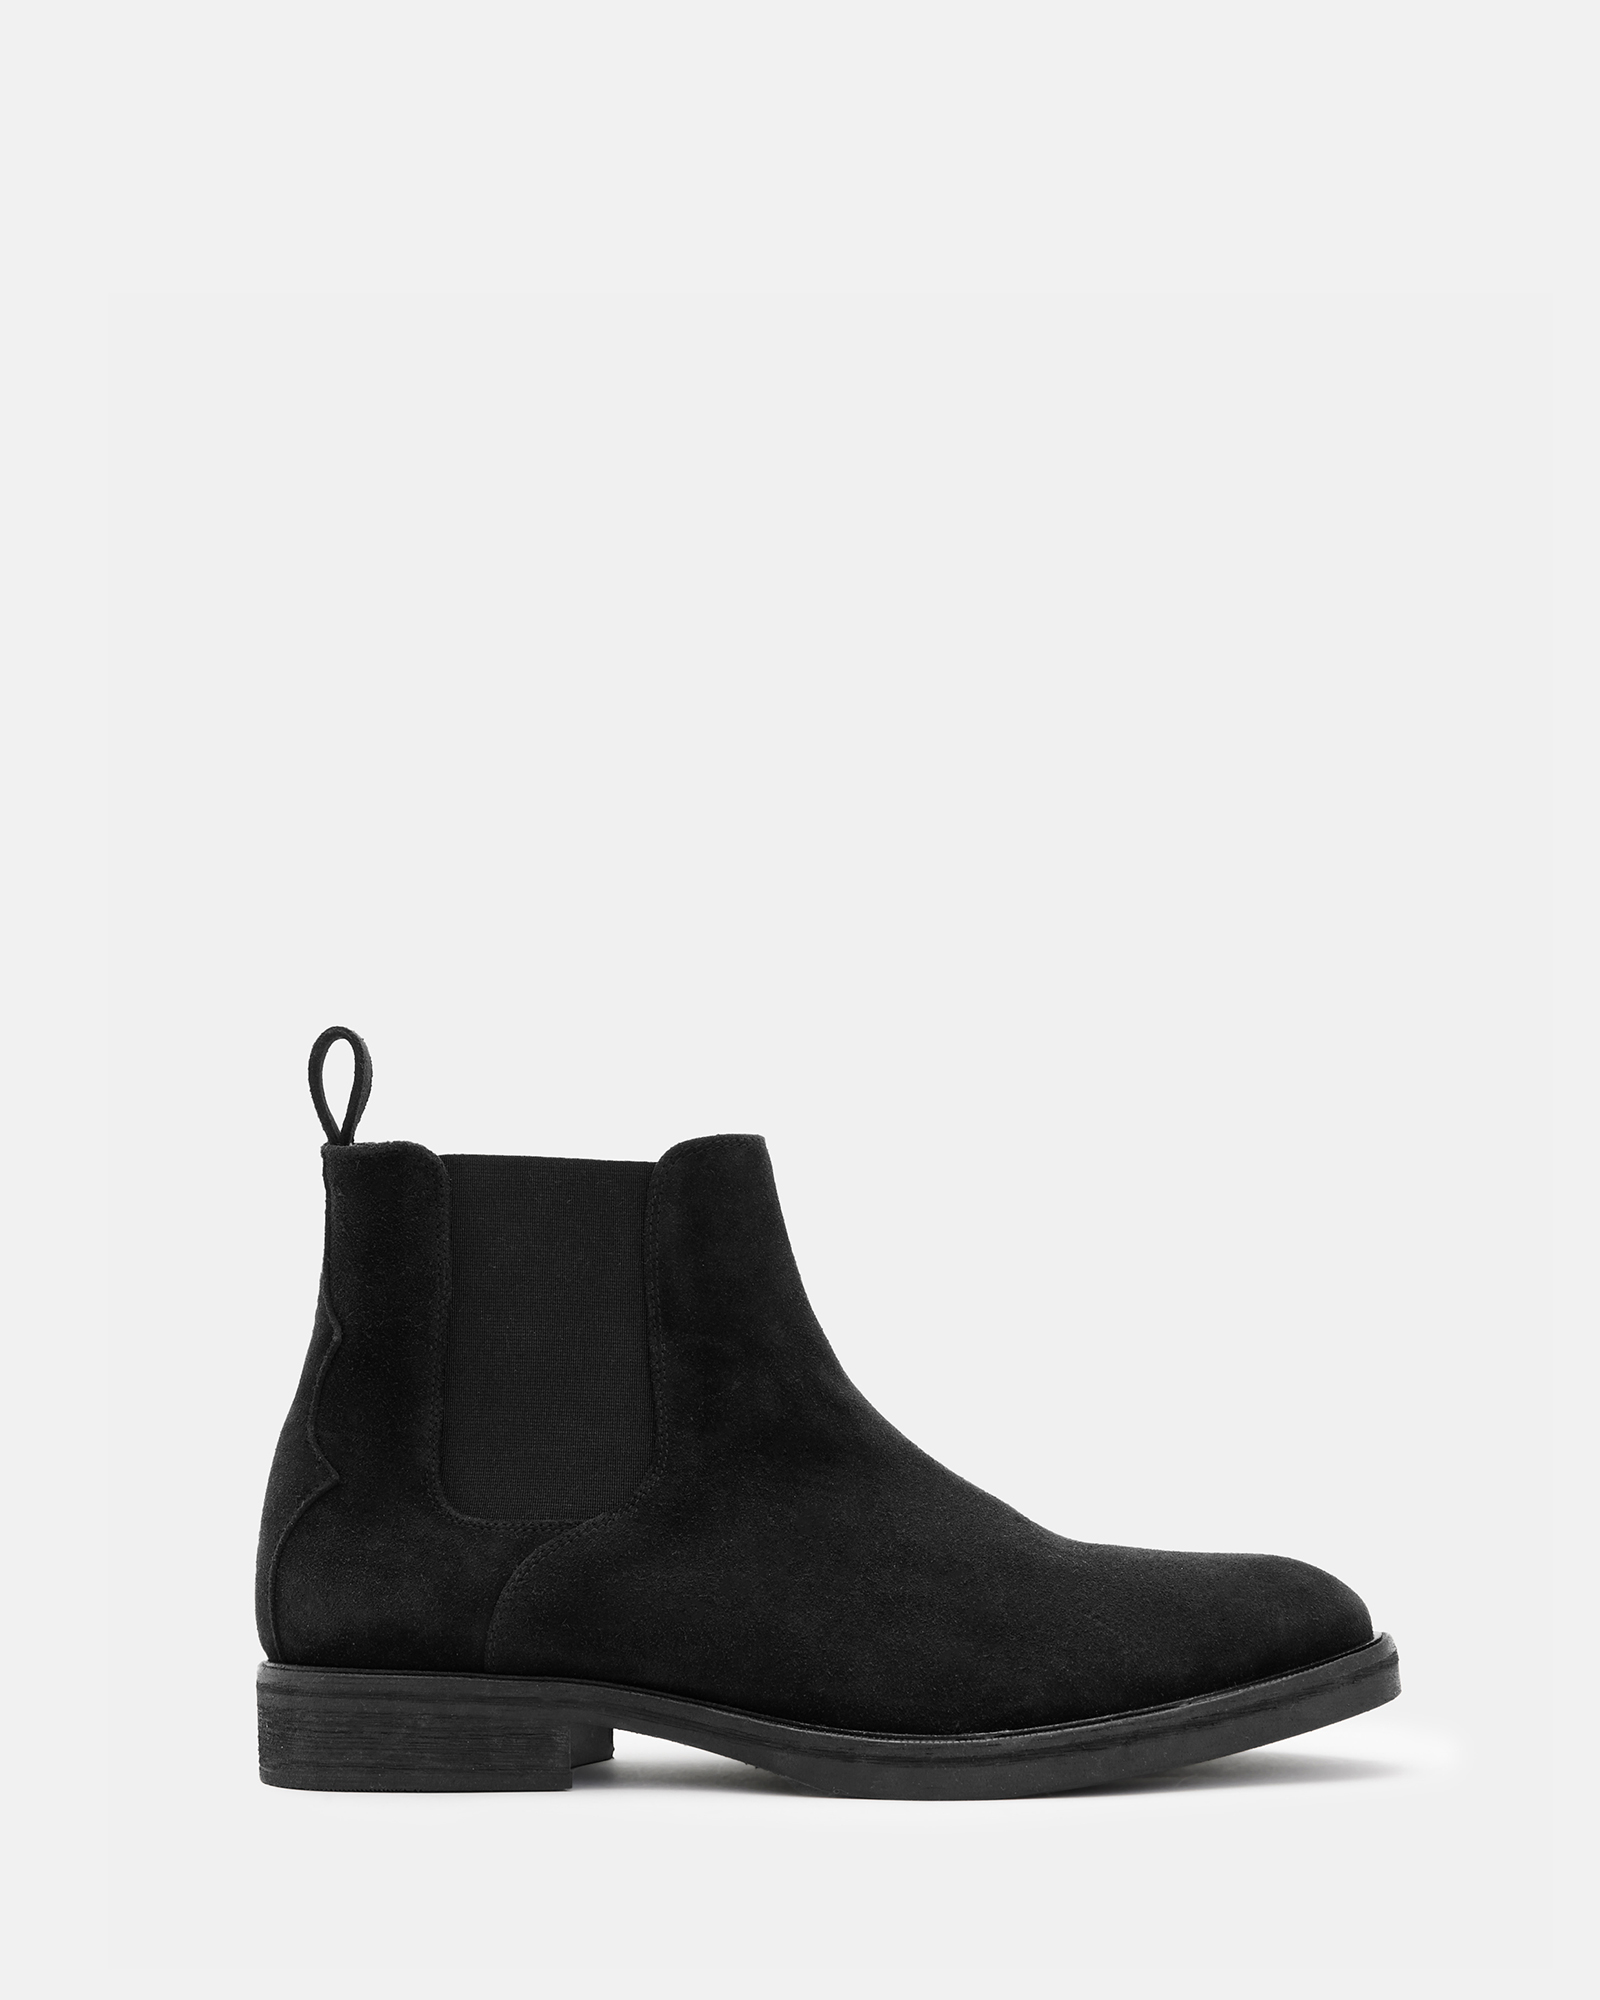 AllSaints Creed Suede Chelsea Boots,, Black